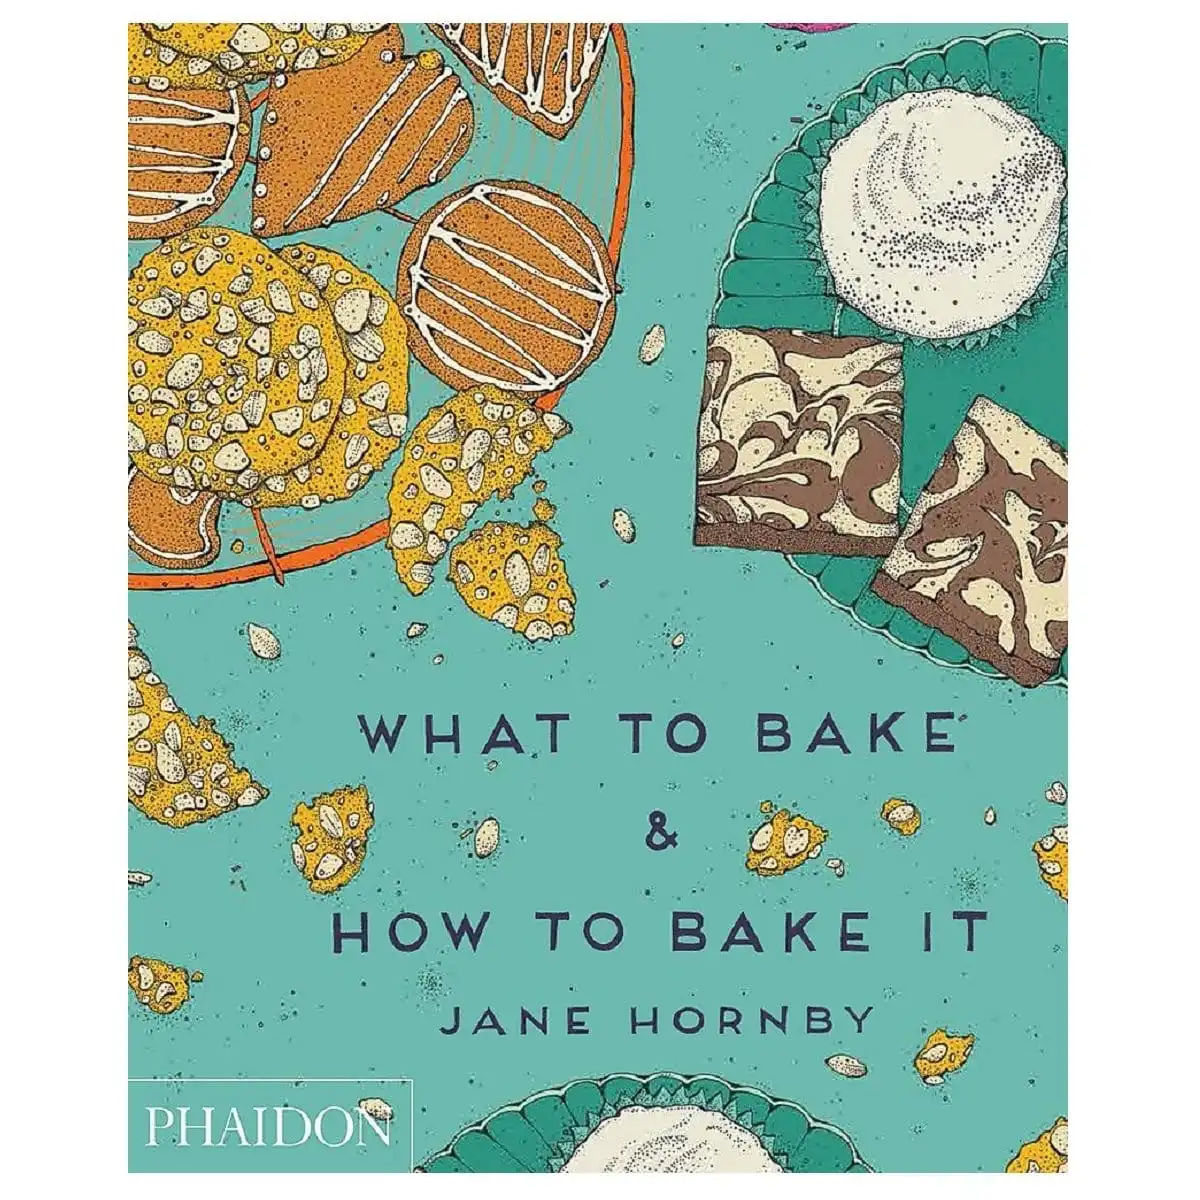 What To Bake & How To Bake It